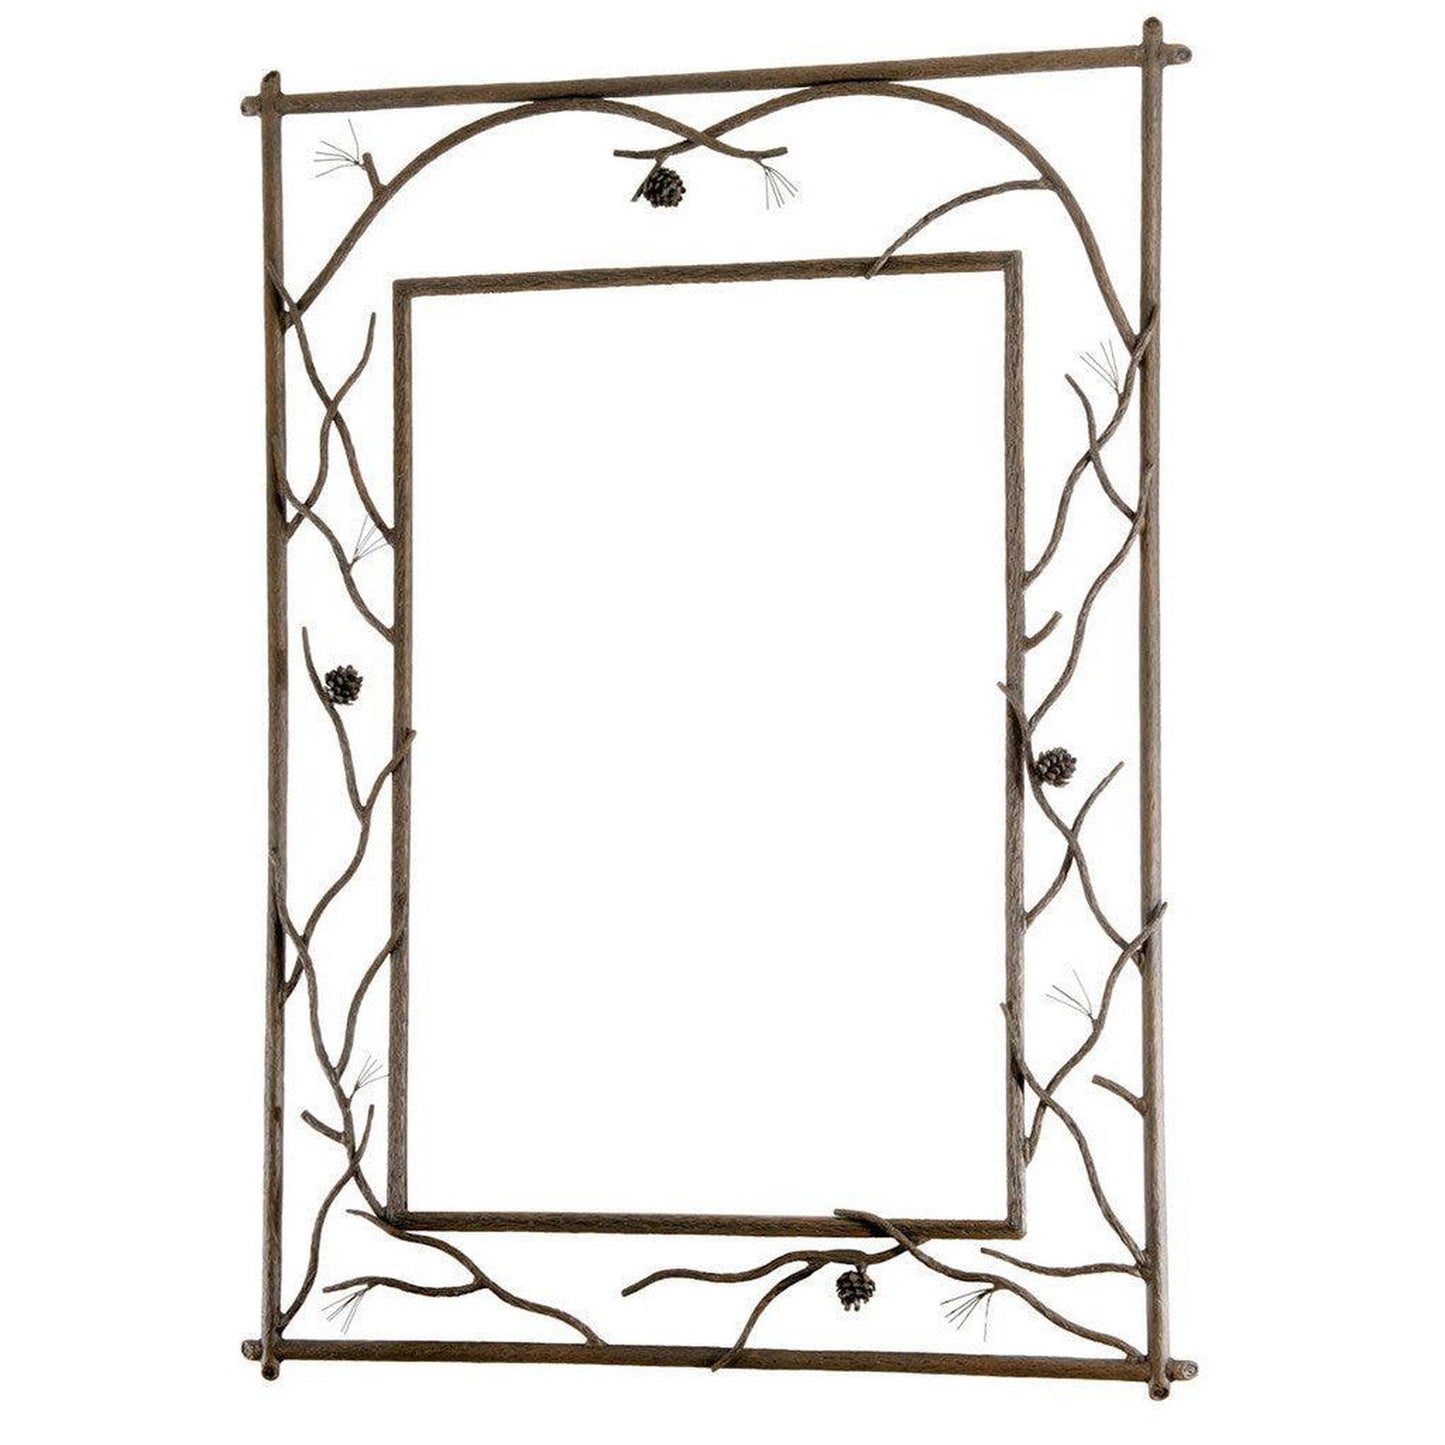 Stone County Ironworks Pine 29" x 35" Small Natural Black Branched Iron Wall Mirror With Gold Iron Accent